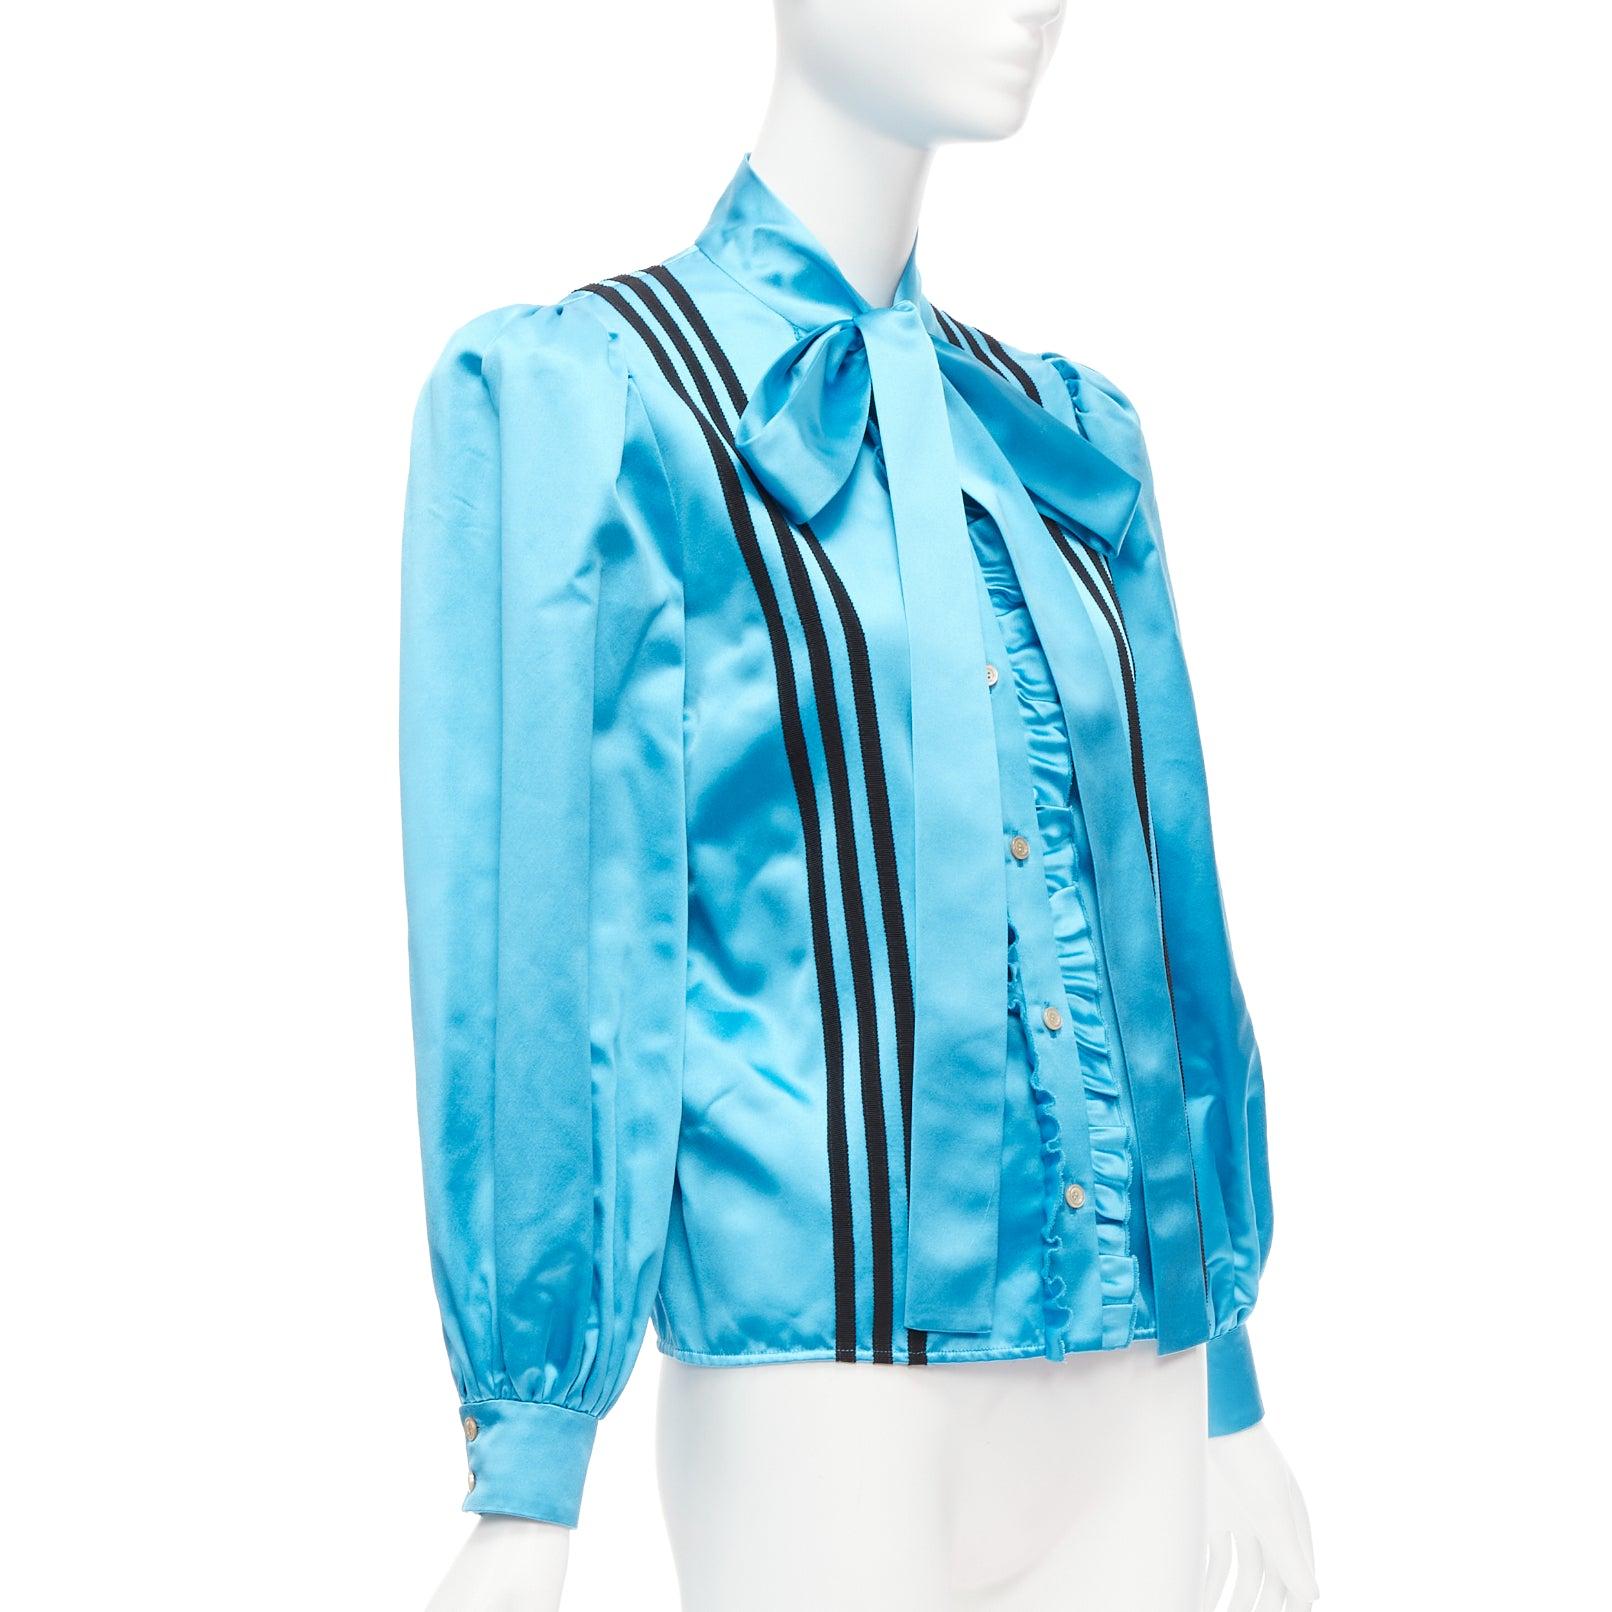 rare GUCCI ADIDAS blue silk 3 stripe pussy bow Victorian puff sleeve blouse IT38
Reference: AAWC/A00676
Brand: Gucci
Designer: Alessandro Michele
Collection: Adidas - Runway
Material: 100% Silk
Color: Blue, Black
Pattern: Solid
Closure: Button
Extra